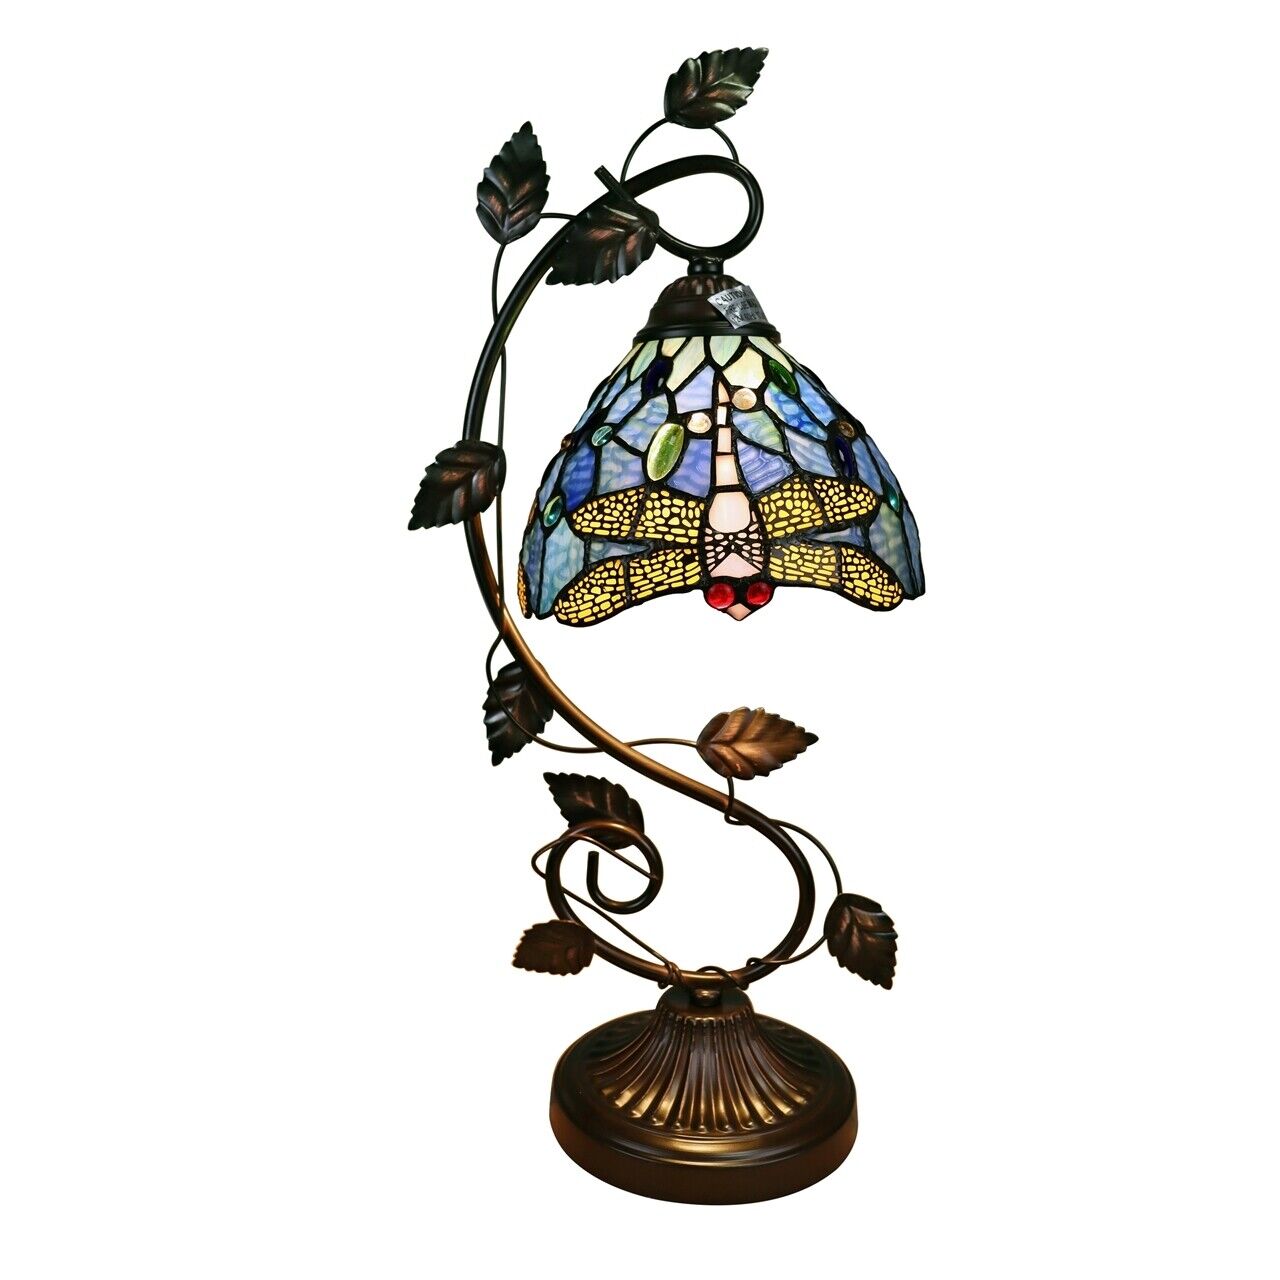 23" Antique Vintage Style Stained Glass Dragonfly Floral Table Lamp